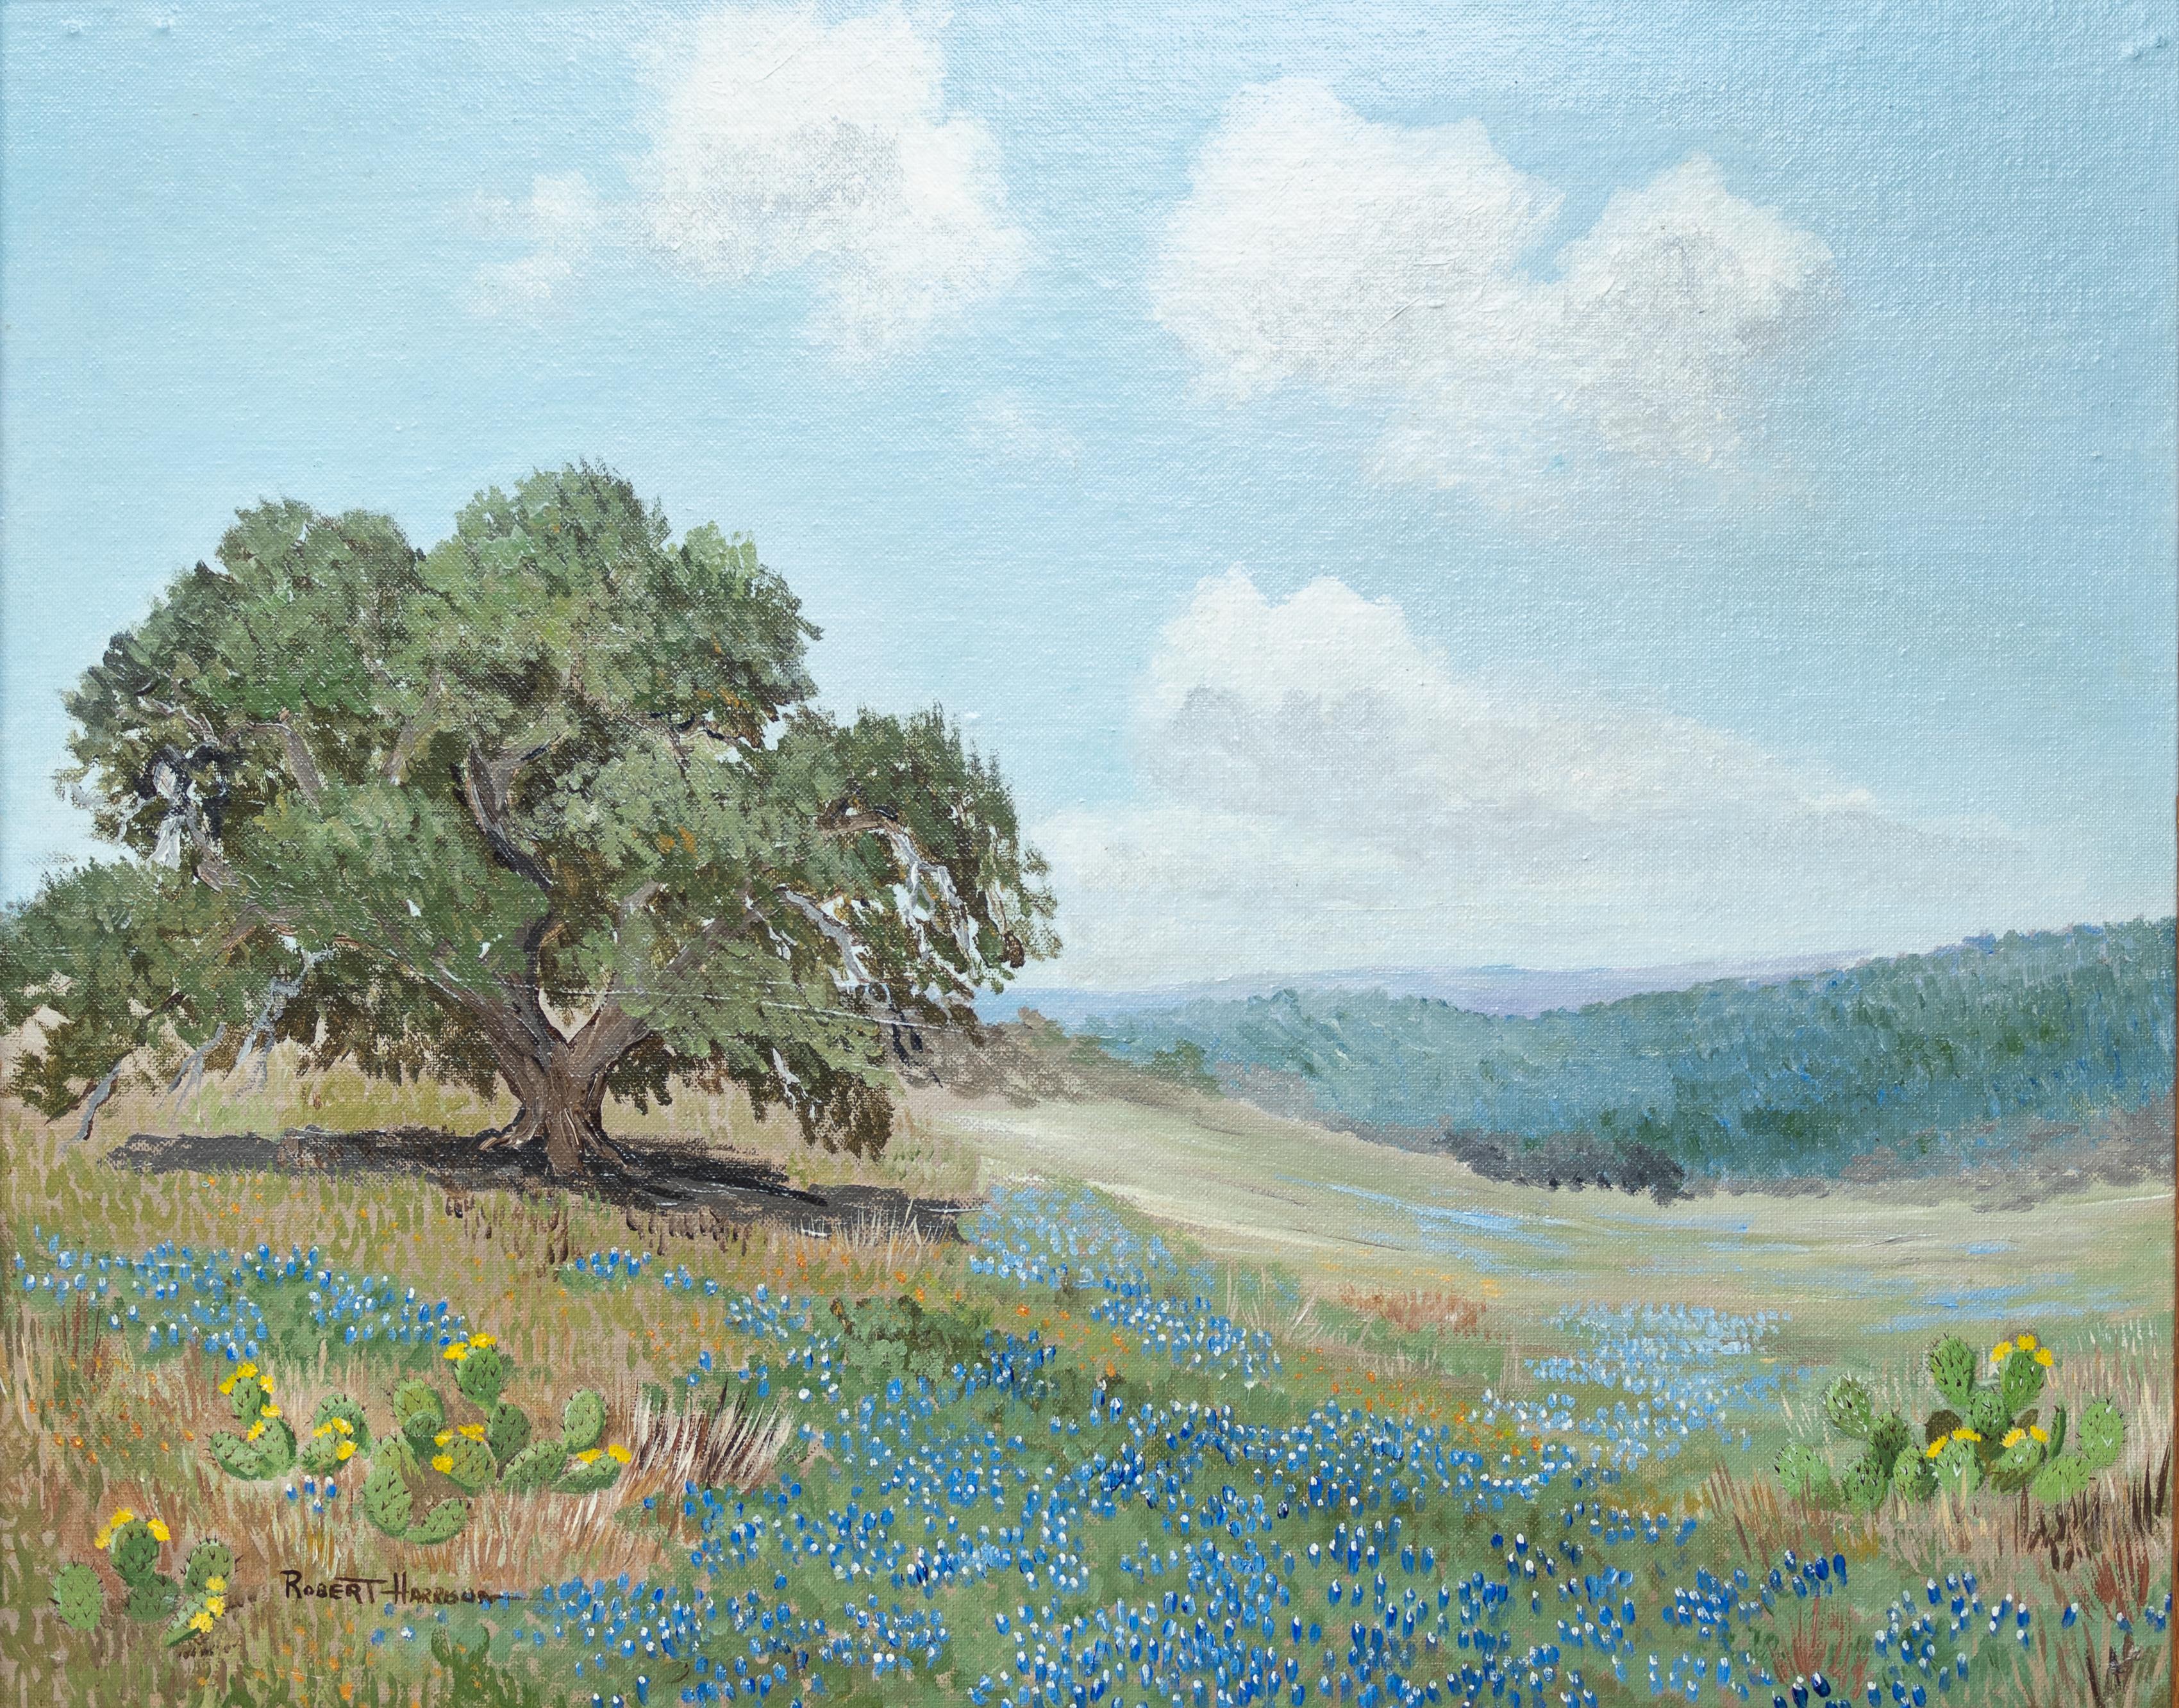 Robert Harrison Landscape Painting - Spring Pastoral Landscape with Bluebonnets and Yellow Prickly Pear